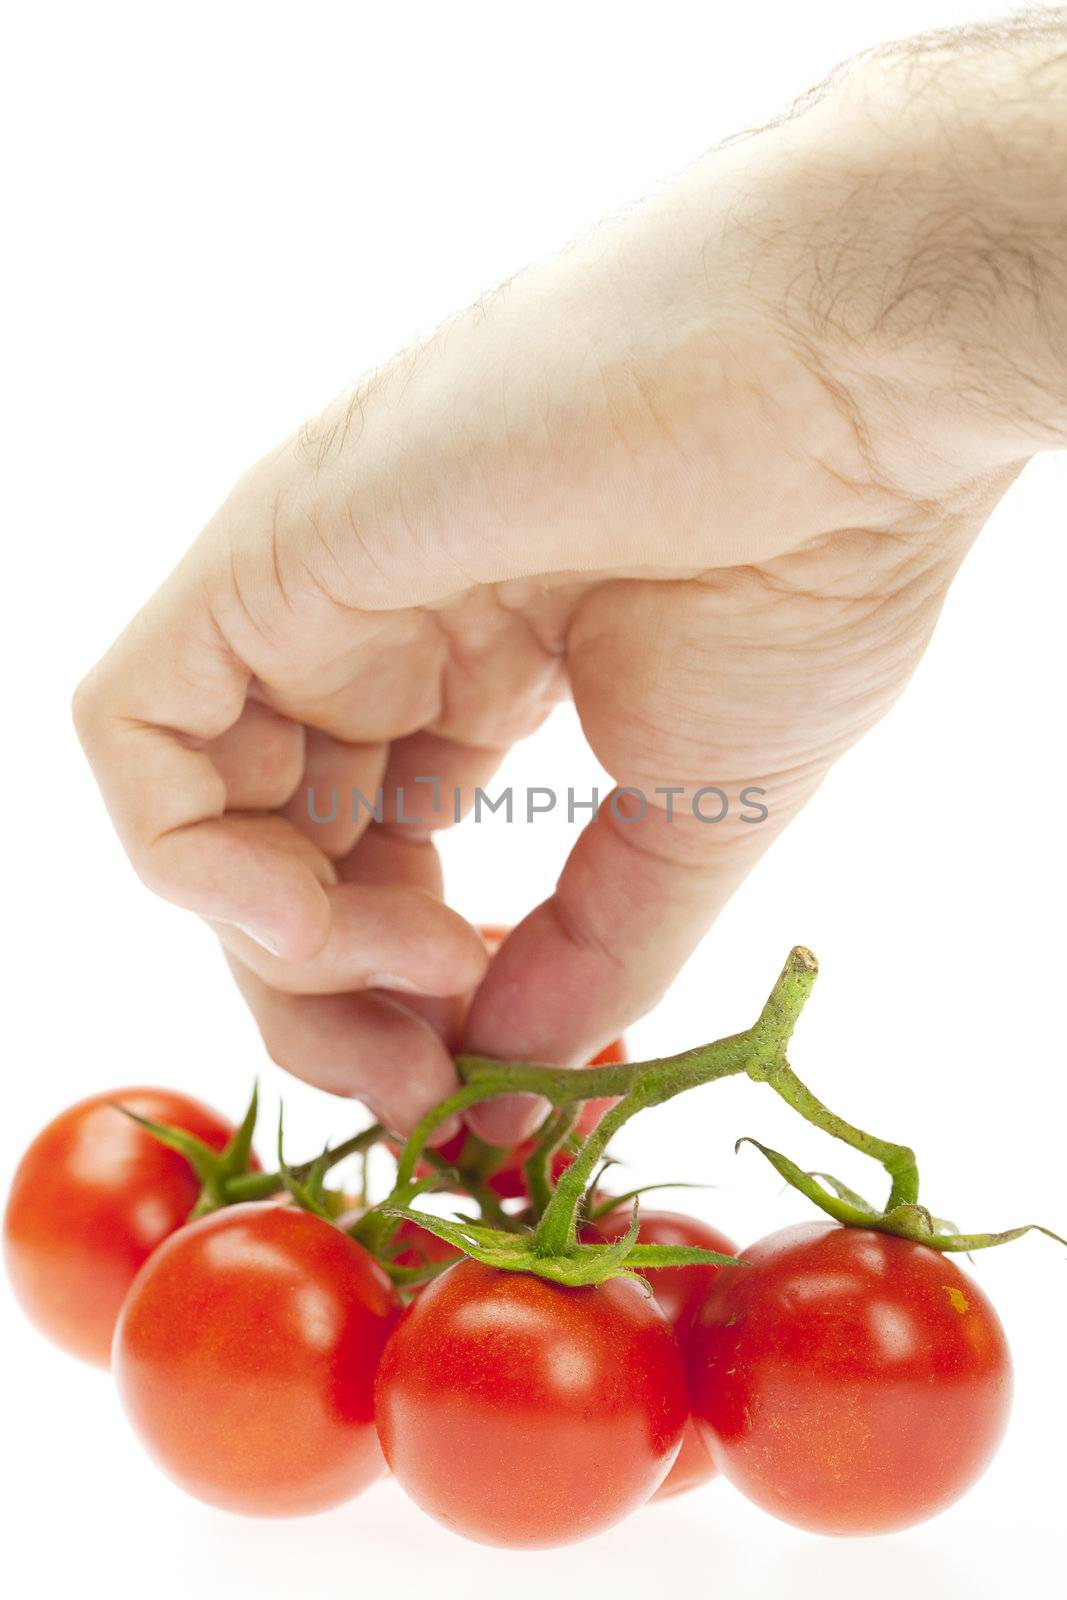 tomatoes in hand isolated on white by jannyjus